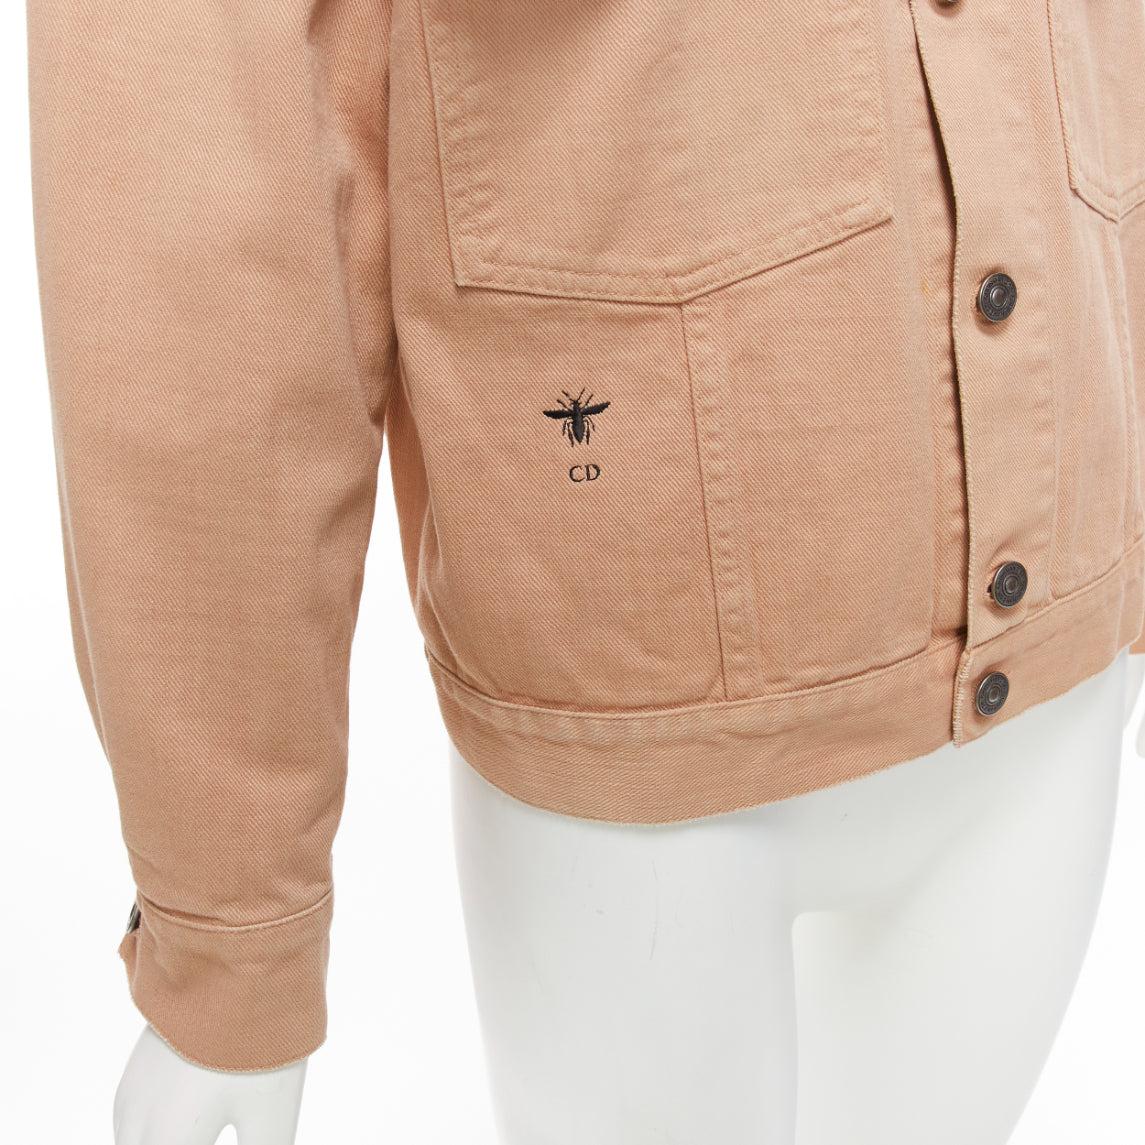 CHRISTIAN DIOR dirty peach denim CD bee logo boxy trucker jacket FR36 S
Reference: NILI/A00030
Brand: Dior
Designer: Maria Grazia Chiuri
Material: Denim
Color: Pink
Pattern: Solid
Closure: Button
Extra Details: Back yoke.
Made in: